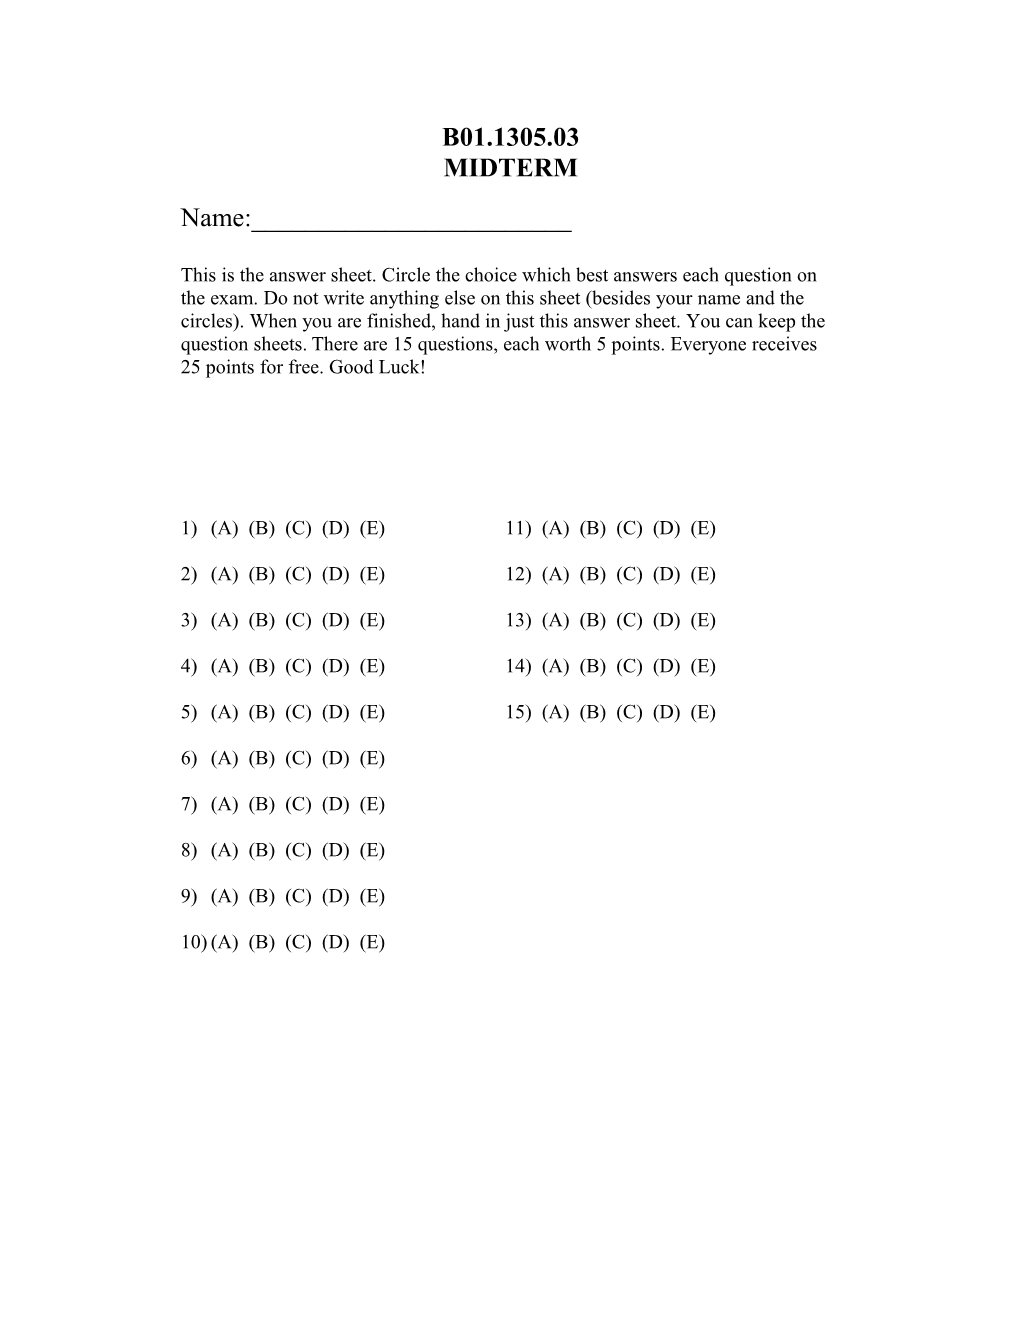 This Is the Answer Sheet. Circle the Choice Which Best Answers Each Question on the Exam